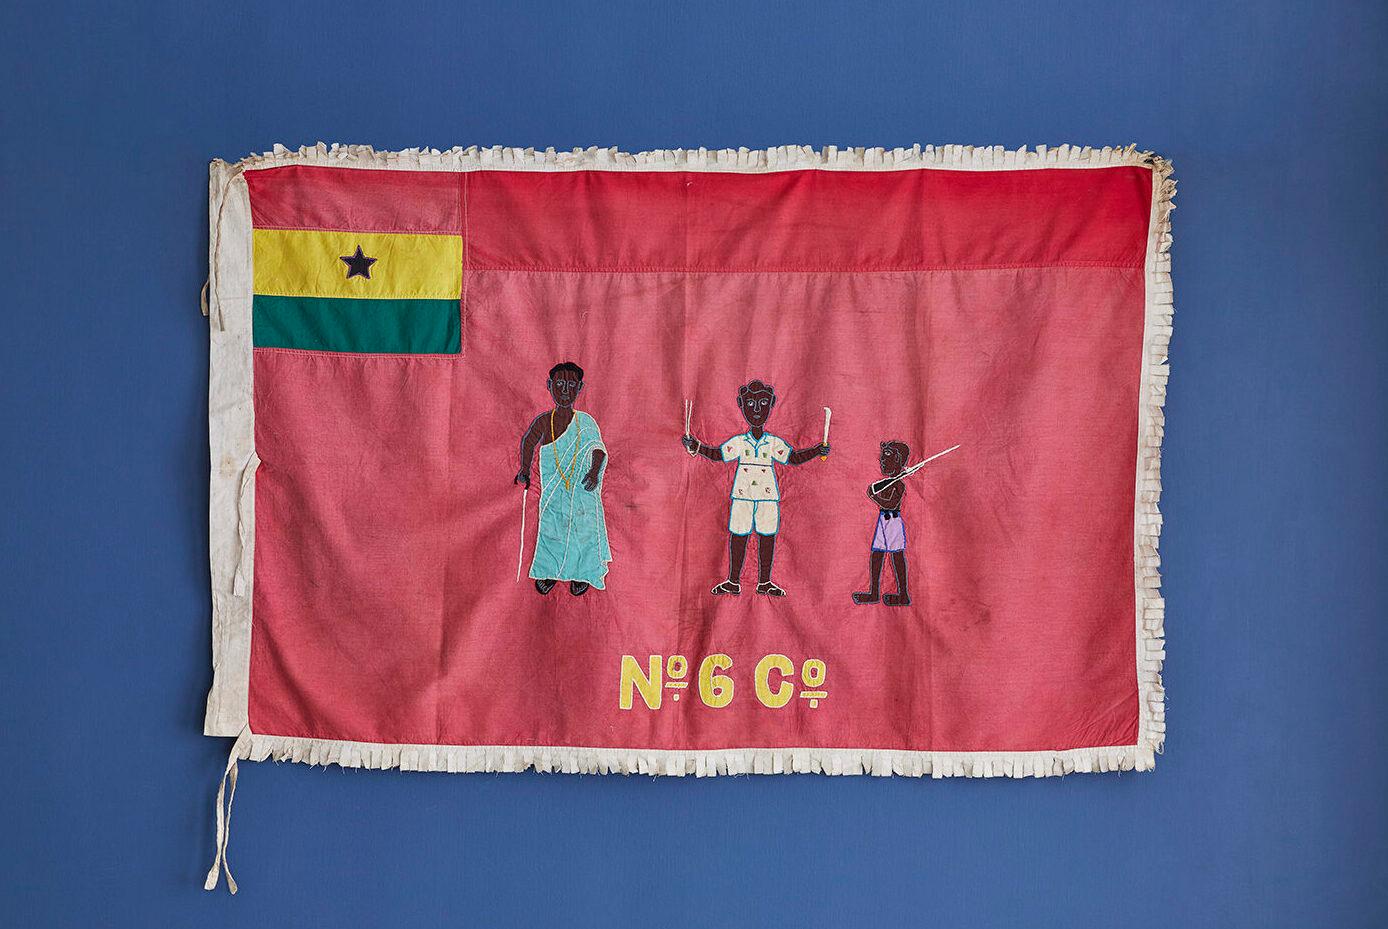 
Kwamina Amoaku
Ghana, 1960's

Fante Asafo flag in cotton applique patterns. Fante People.

Asafo Flags are created by the Fante people of Ghana. The flags are visual representations of military organisations in Fante communities known as “Asafo”.